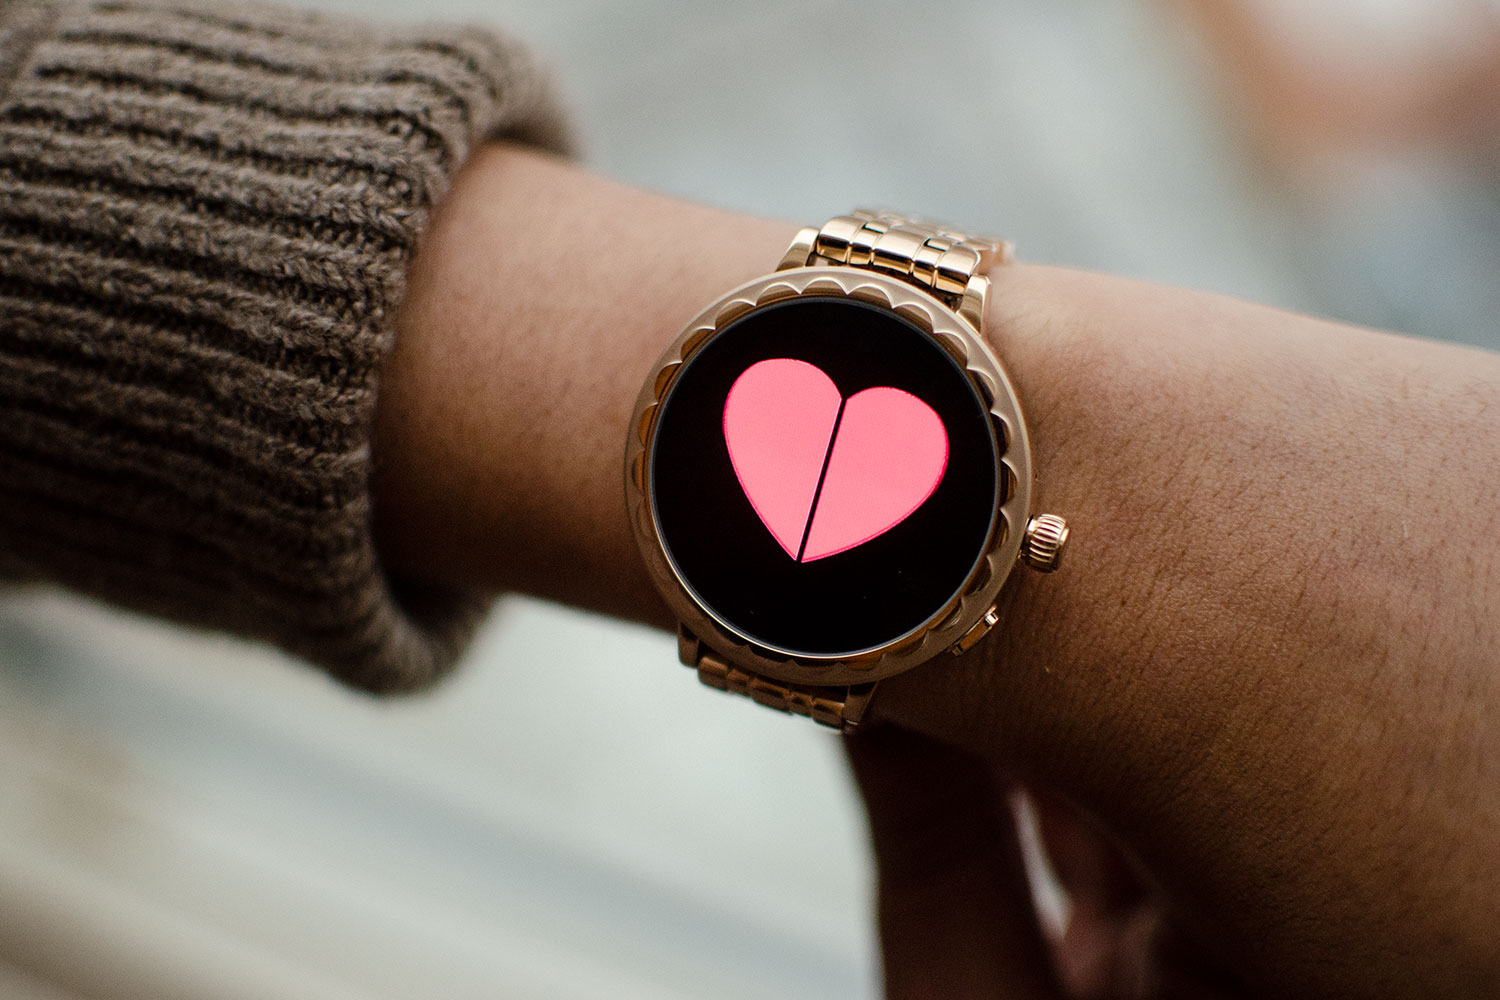 undertøj tørst Foresee Fishing for Compliments? Put on Kate Spade's New Scallop 2 Smartwatch |  Digital Trends